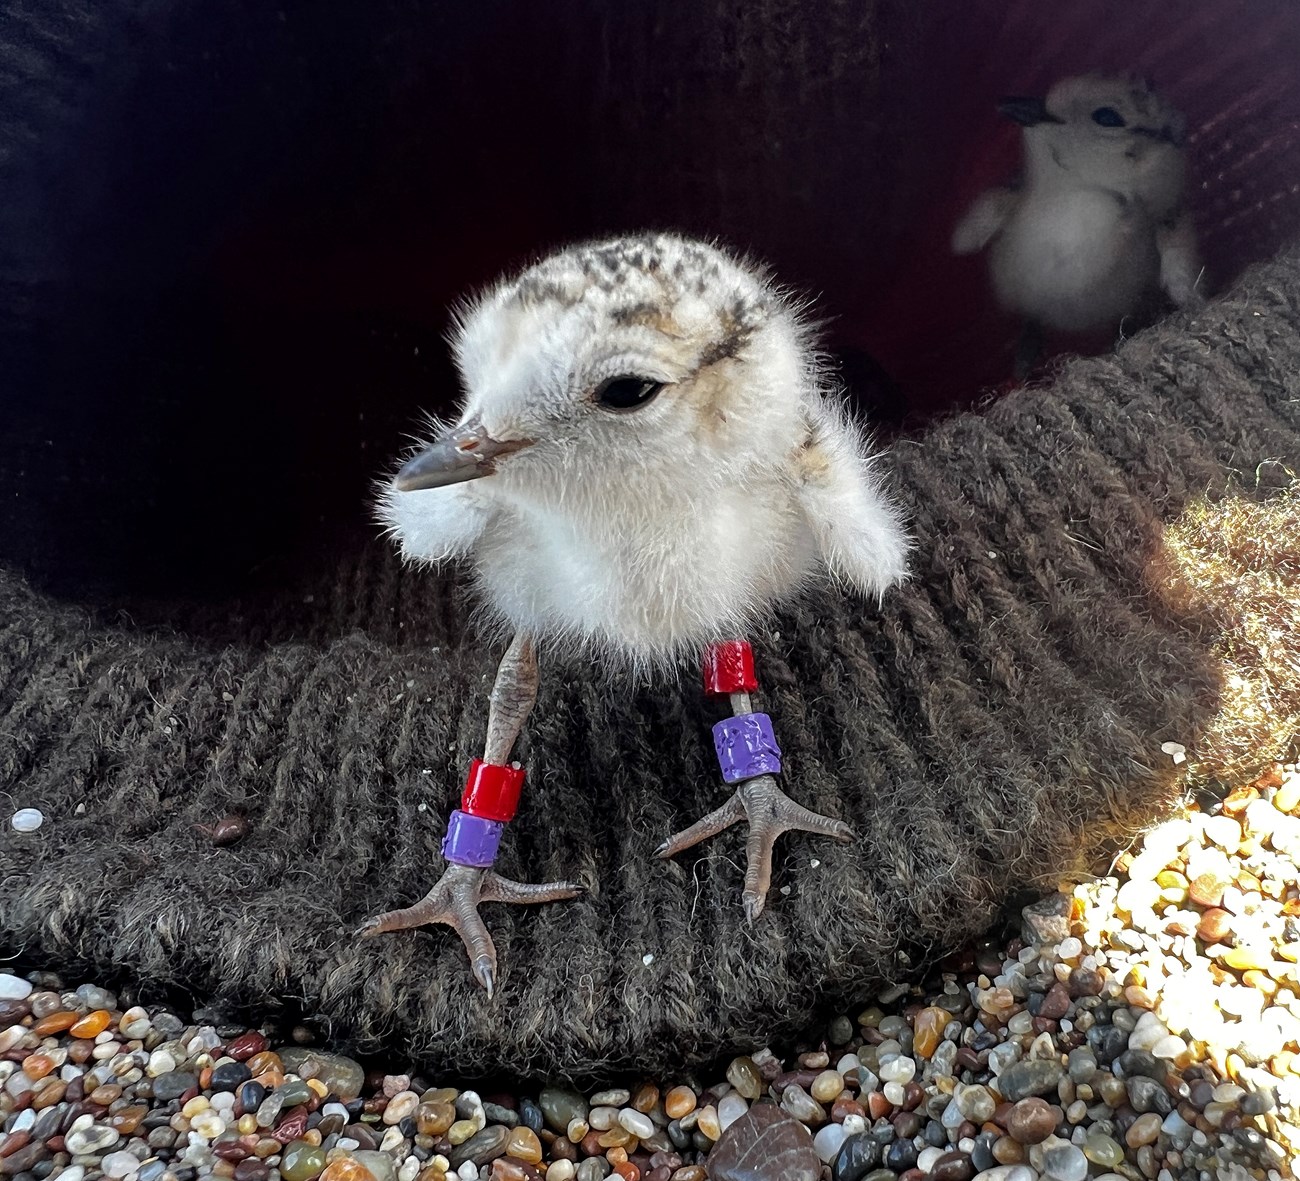 Tiny, downy plover chick with red and violet bands on each leg peers out from the inside of a beanie (hat) propped open in the sand. A second chick looks around further inside the hat.